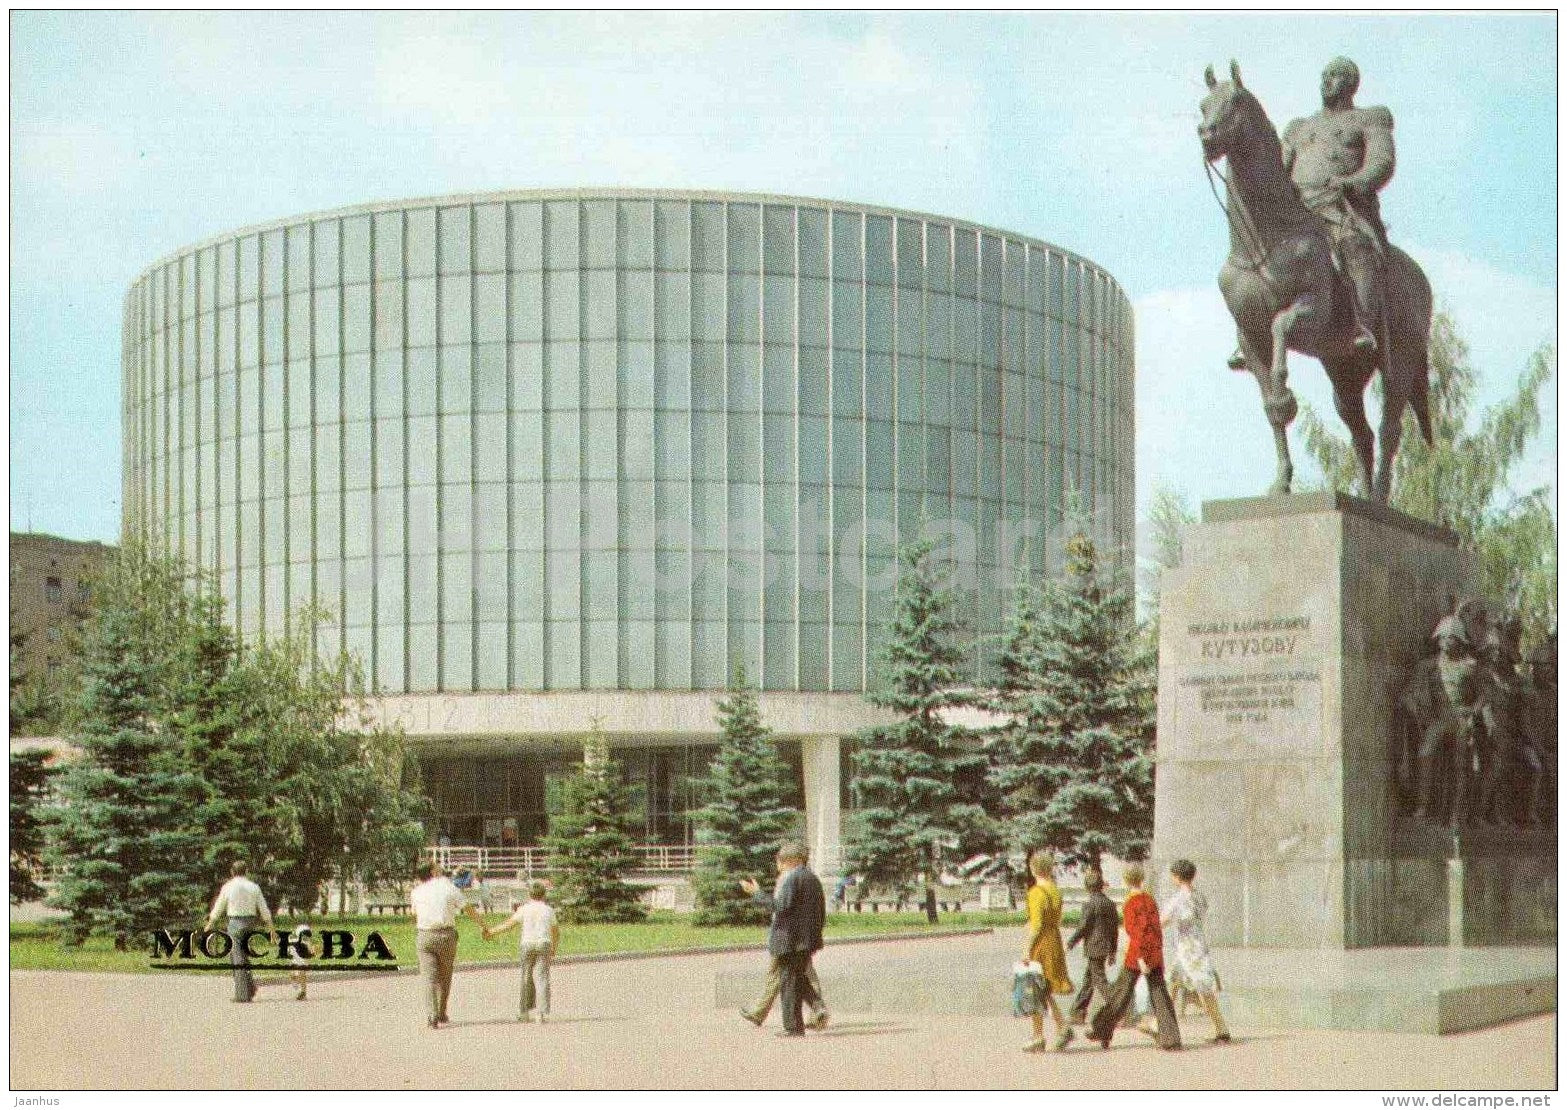 The Panorama Museum of the Battle of Borodino - monument to Kutuzov - Moscow - 1983 - Russia USSR - unused - JH Postcards